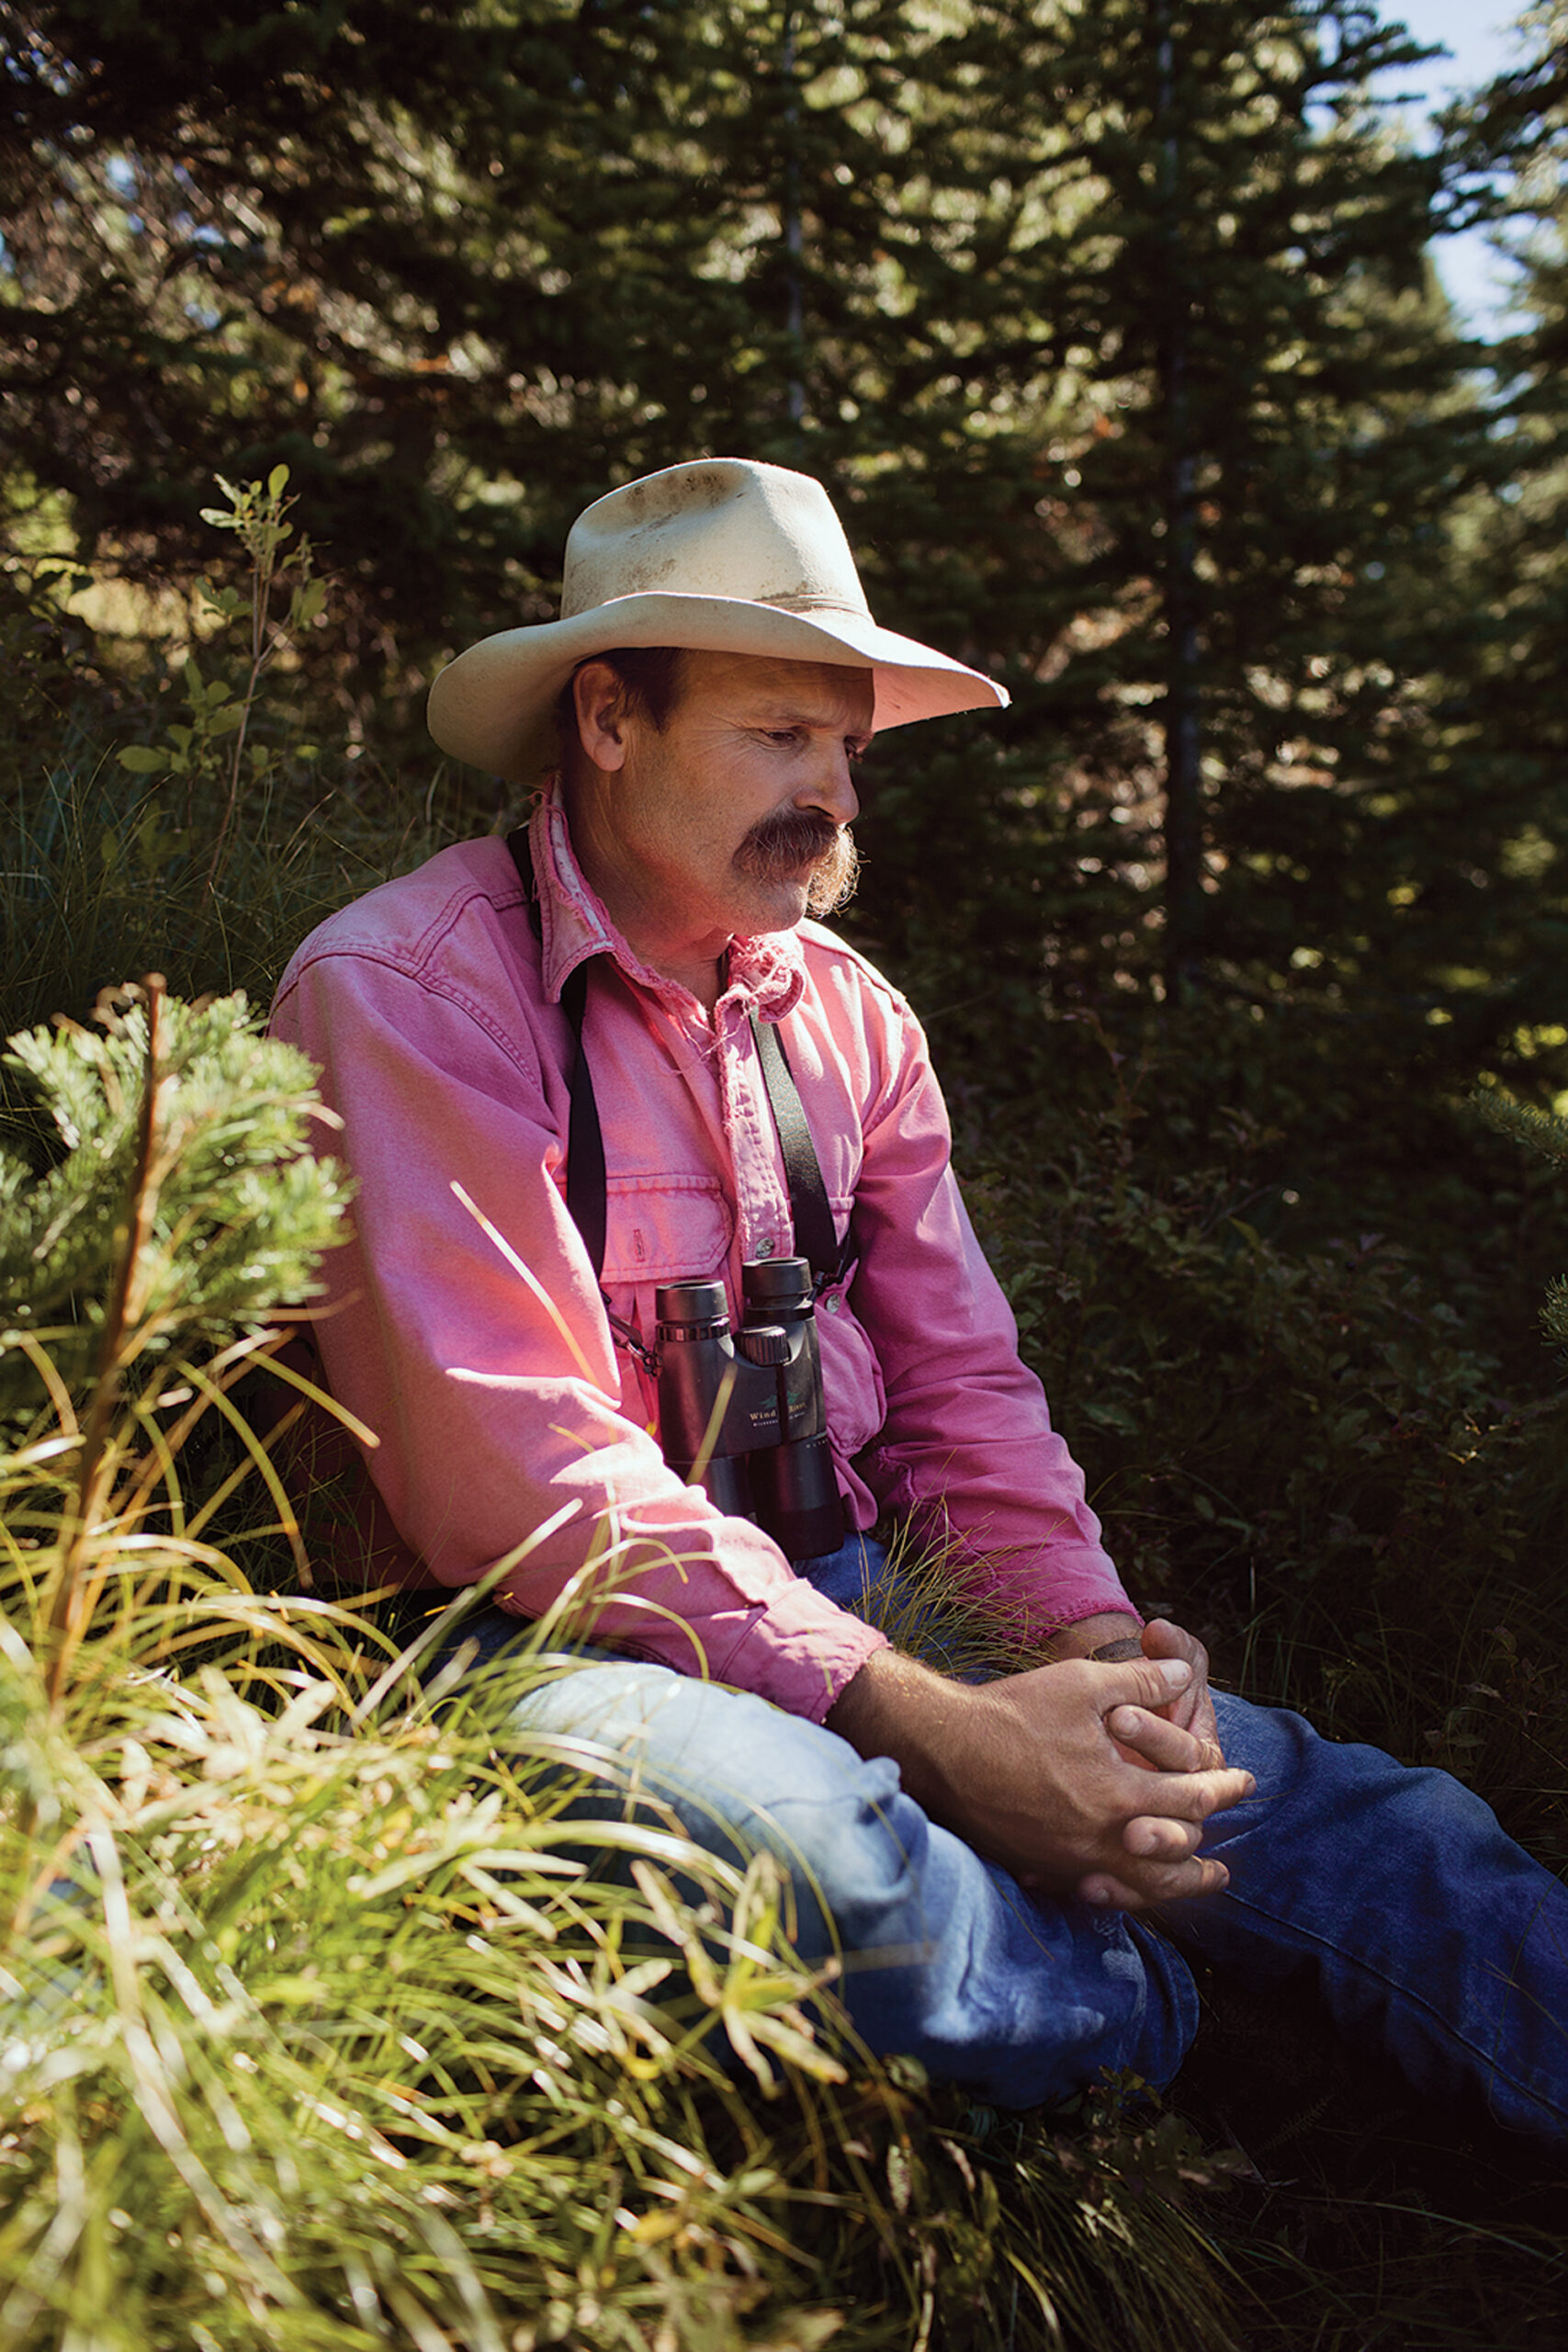 A hunter in a cowboy hat and red shirt reflects after a day of bear hunting.